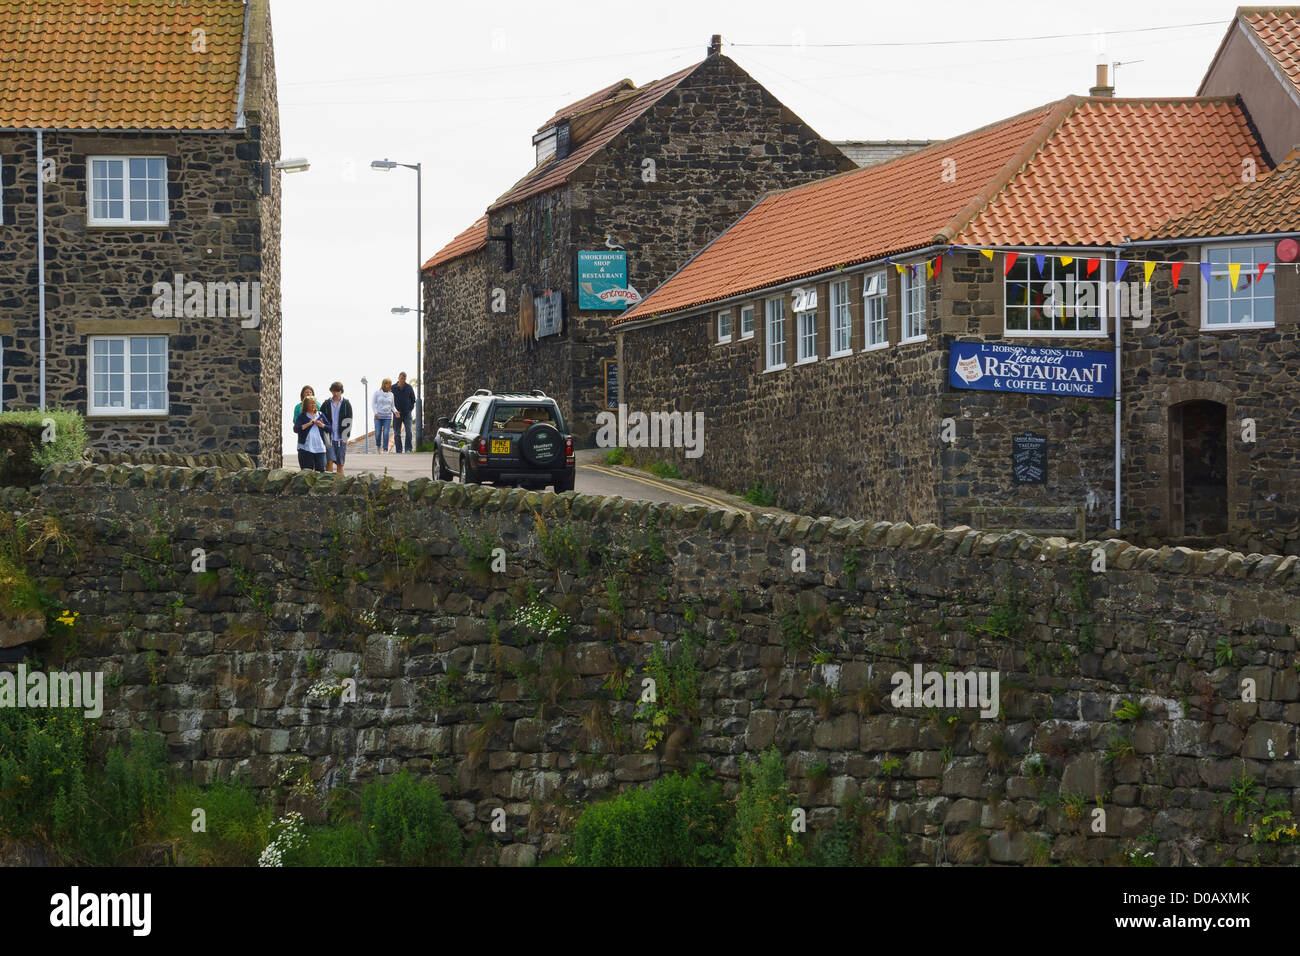 The old fishing village of Craster with signs for the smockhouse and restaurant. Stock Photo